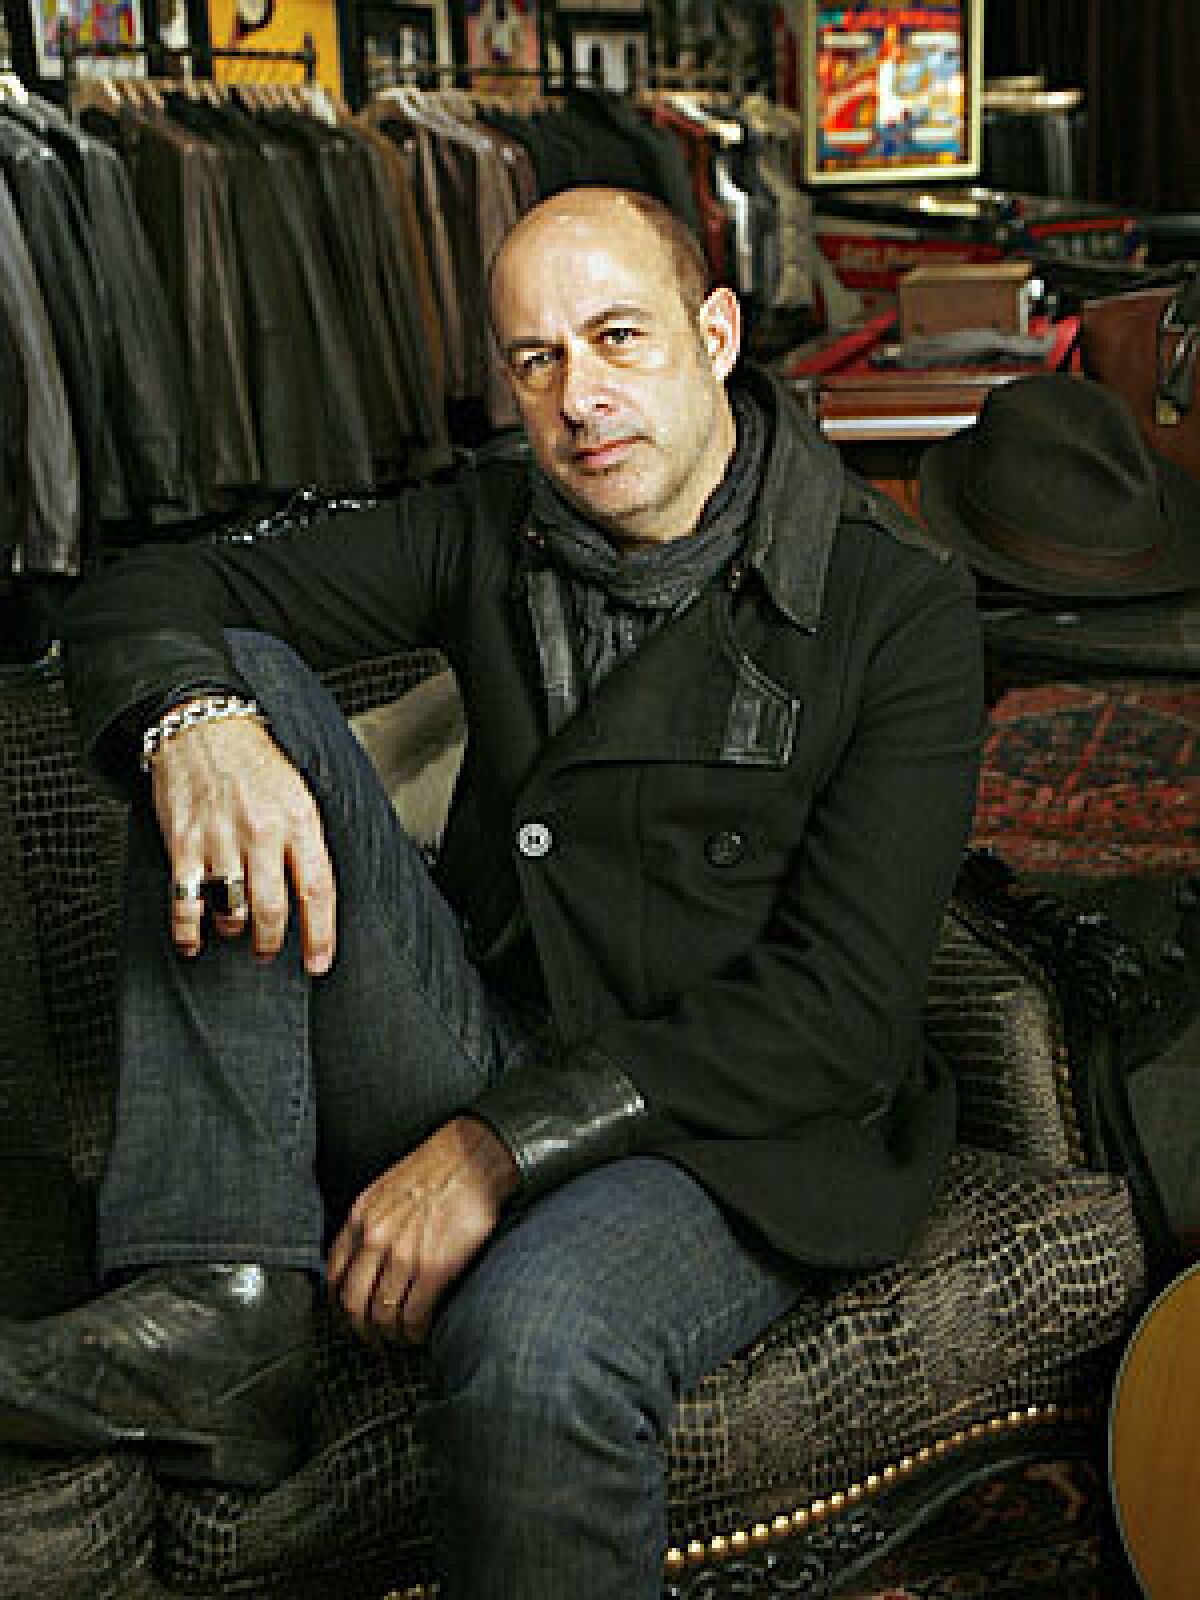 SELLING AN IMAGE: New York-based John Varvatos, who hopes to go global, has long plumbed the rock n roll aesthetic.